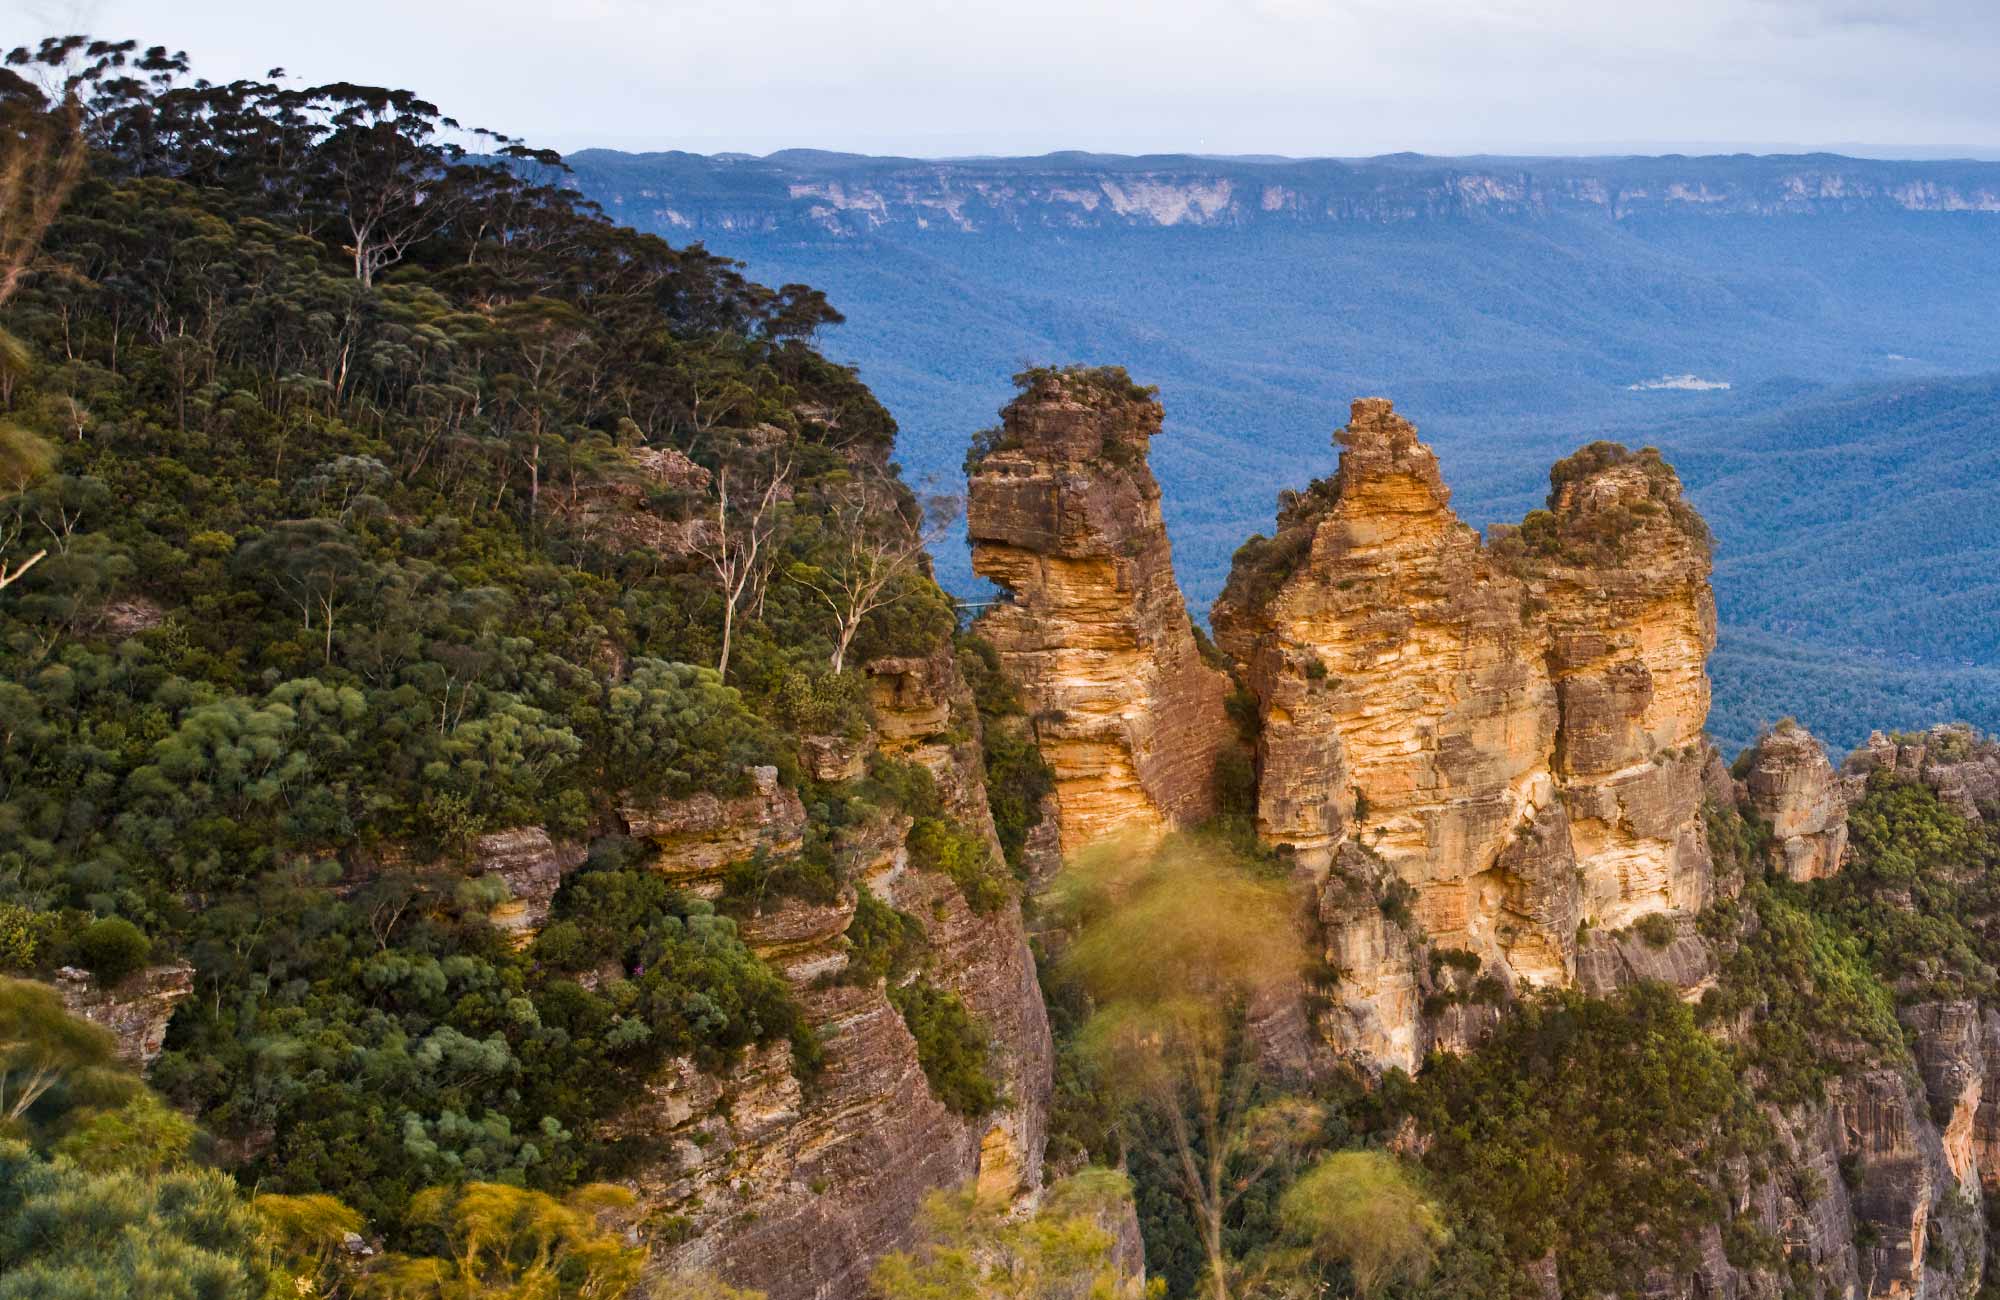 Echo Point lookout, Blue Mountains National Park. Photo: David Finnegan